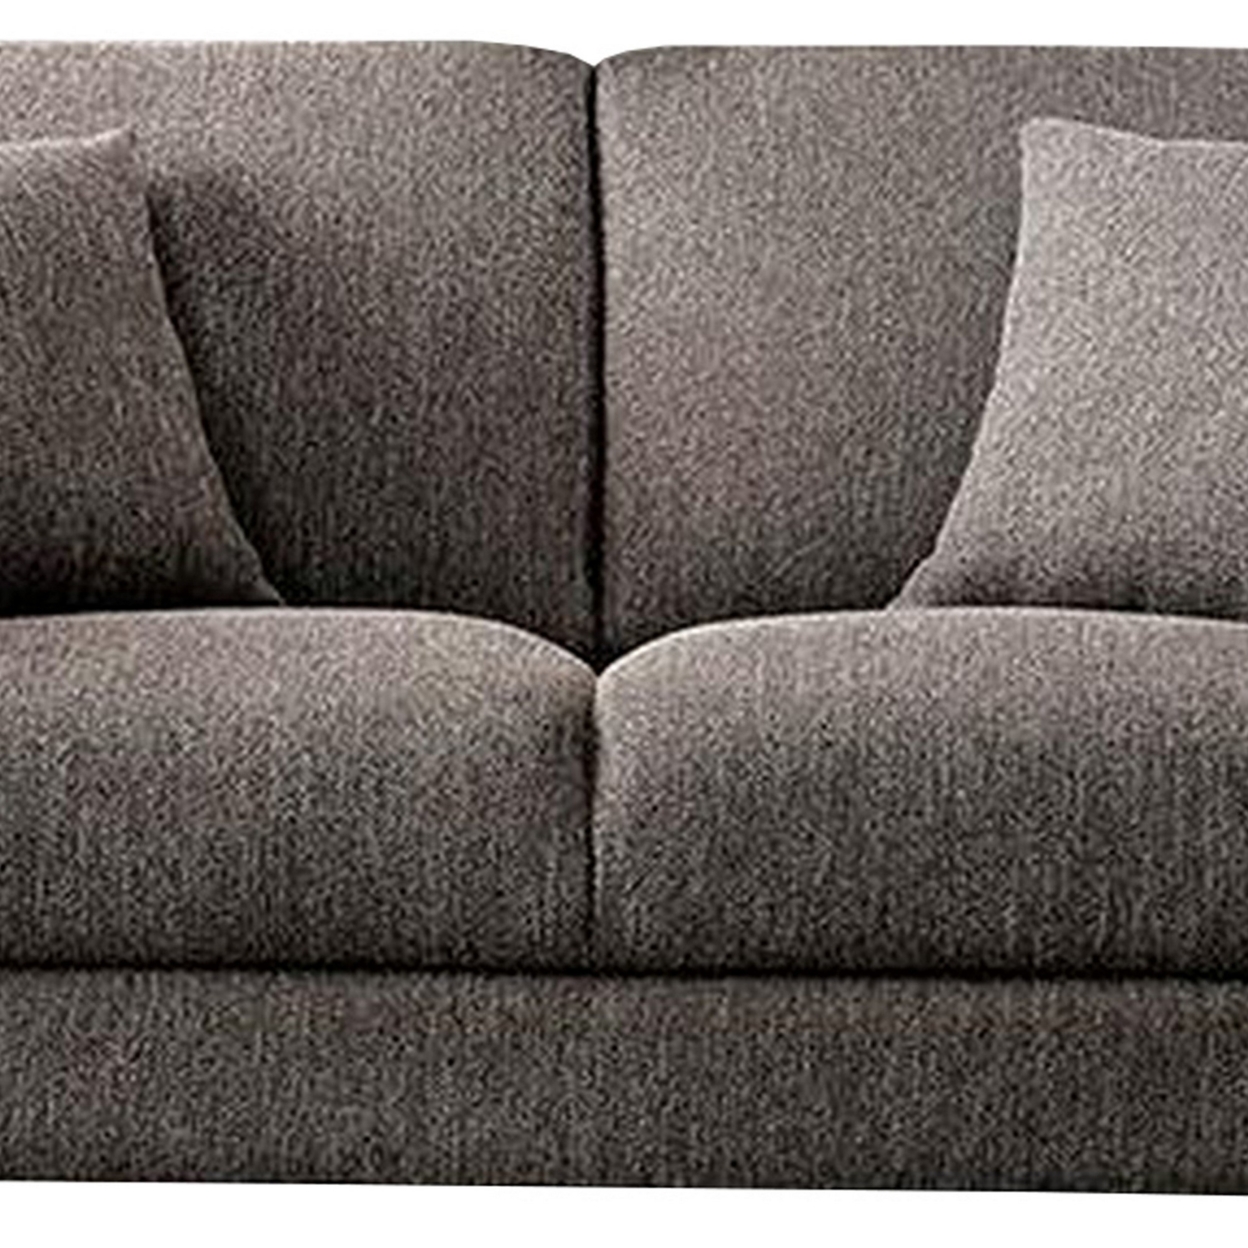 54 Inches Loveseat With Fabric Padded Seat And Metal Legs, Gray- Saltoro Sherpi